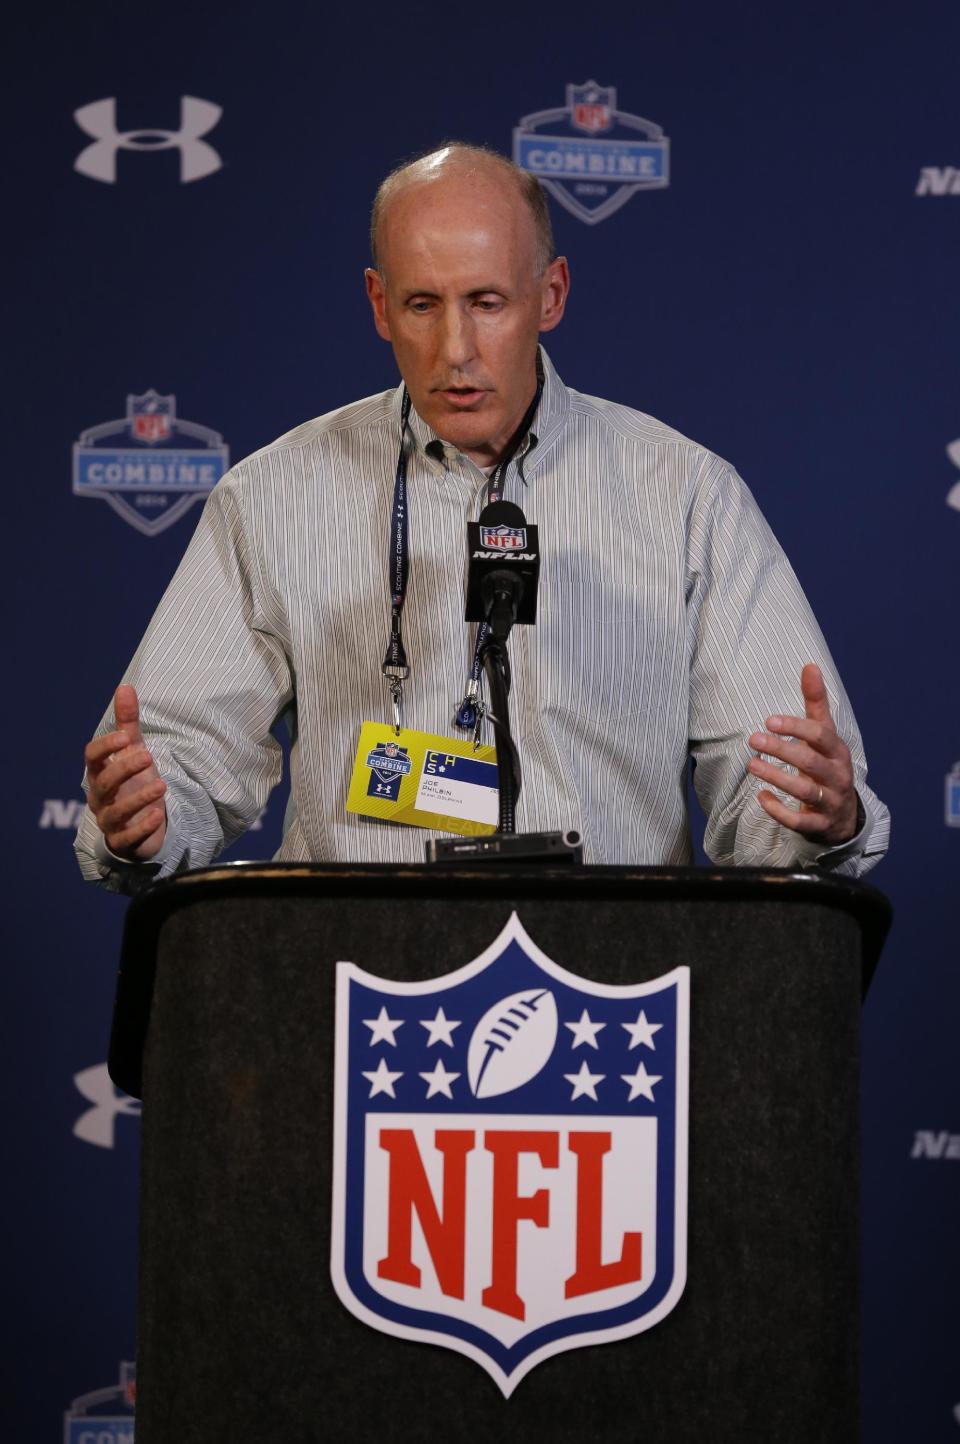 Miami Dolphins head coach Joe Philbin answers a question during a news conference at the NFL football scouting combine in Indianapolis, Thursday, Feb. 20, 2014. (AP Photo/Michael Conroy)